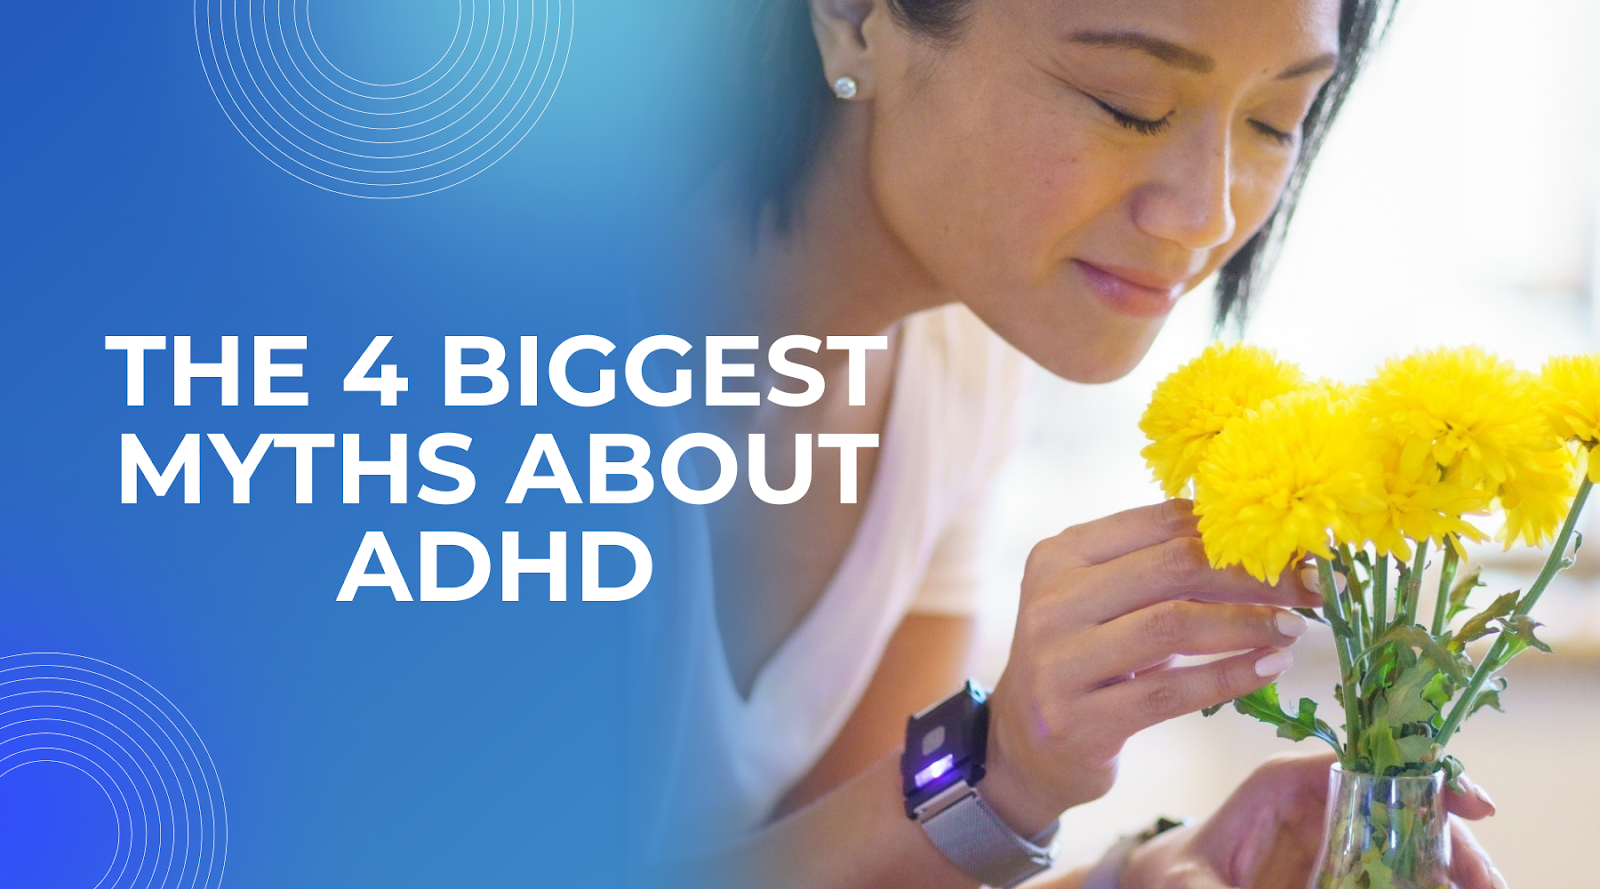 The 4 Biggest Myths About ADHD – Busted!